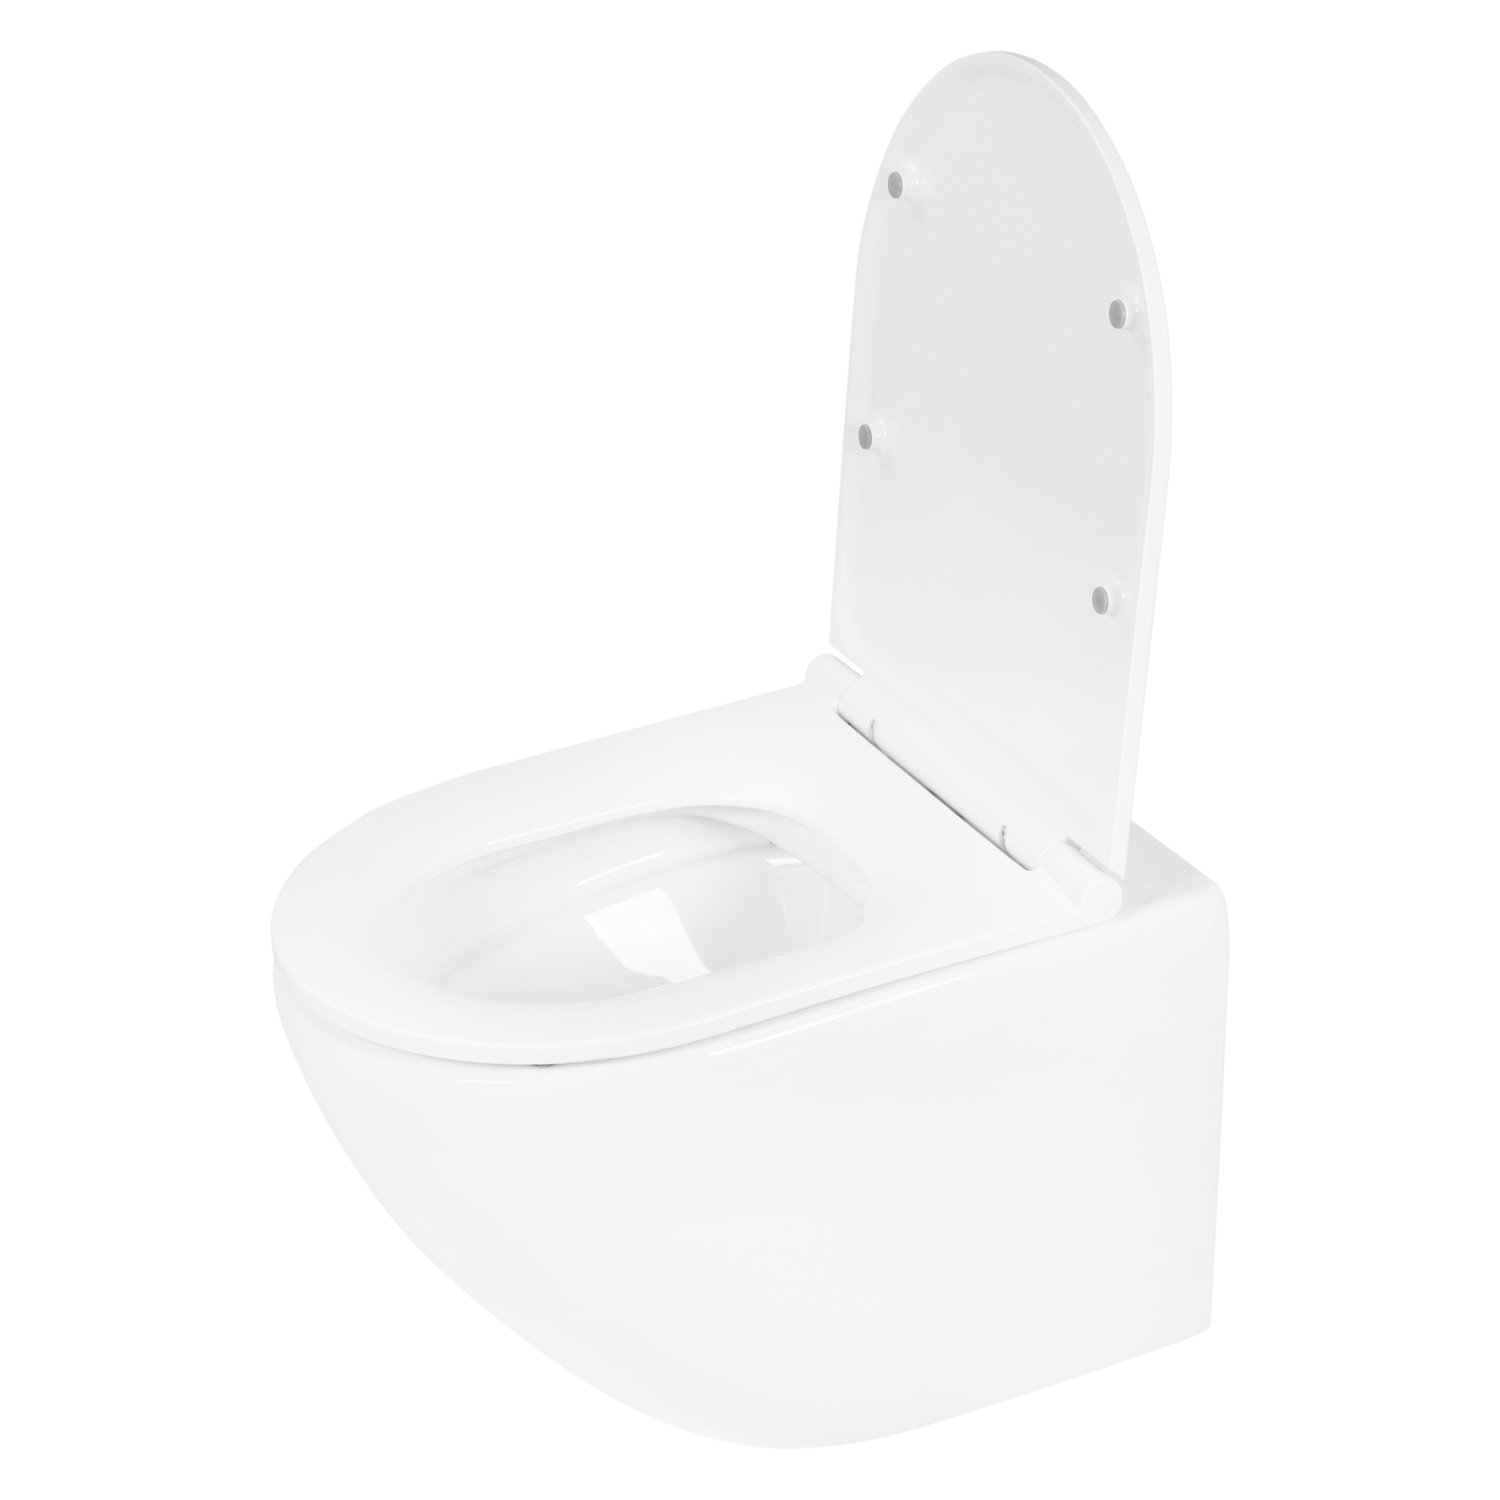 Wandtoilet Differnz Met PK Uitgang Rimless Inclusief Toiletbril Glans Wit Differnz